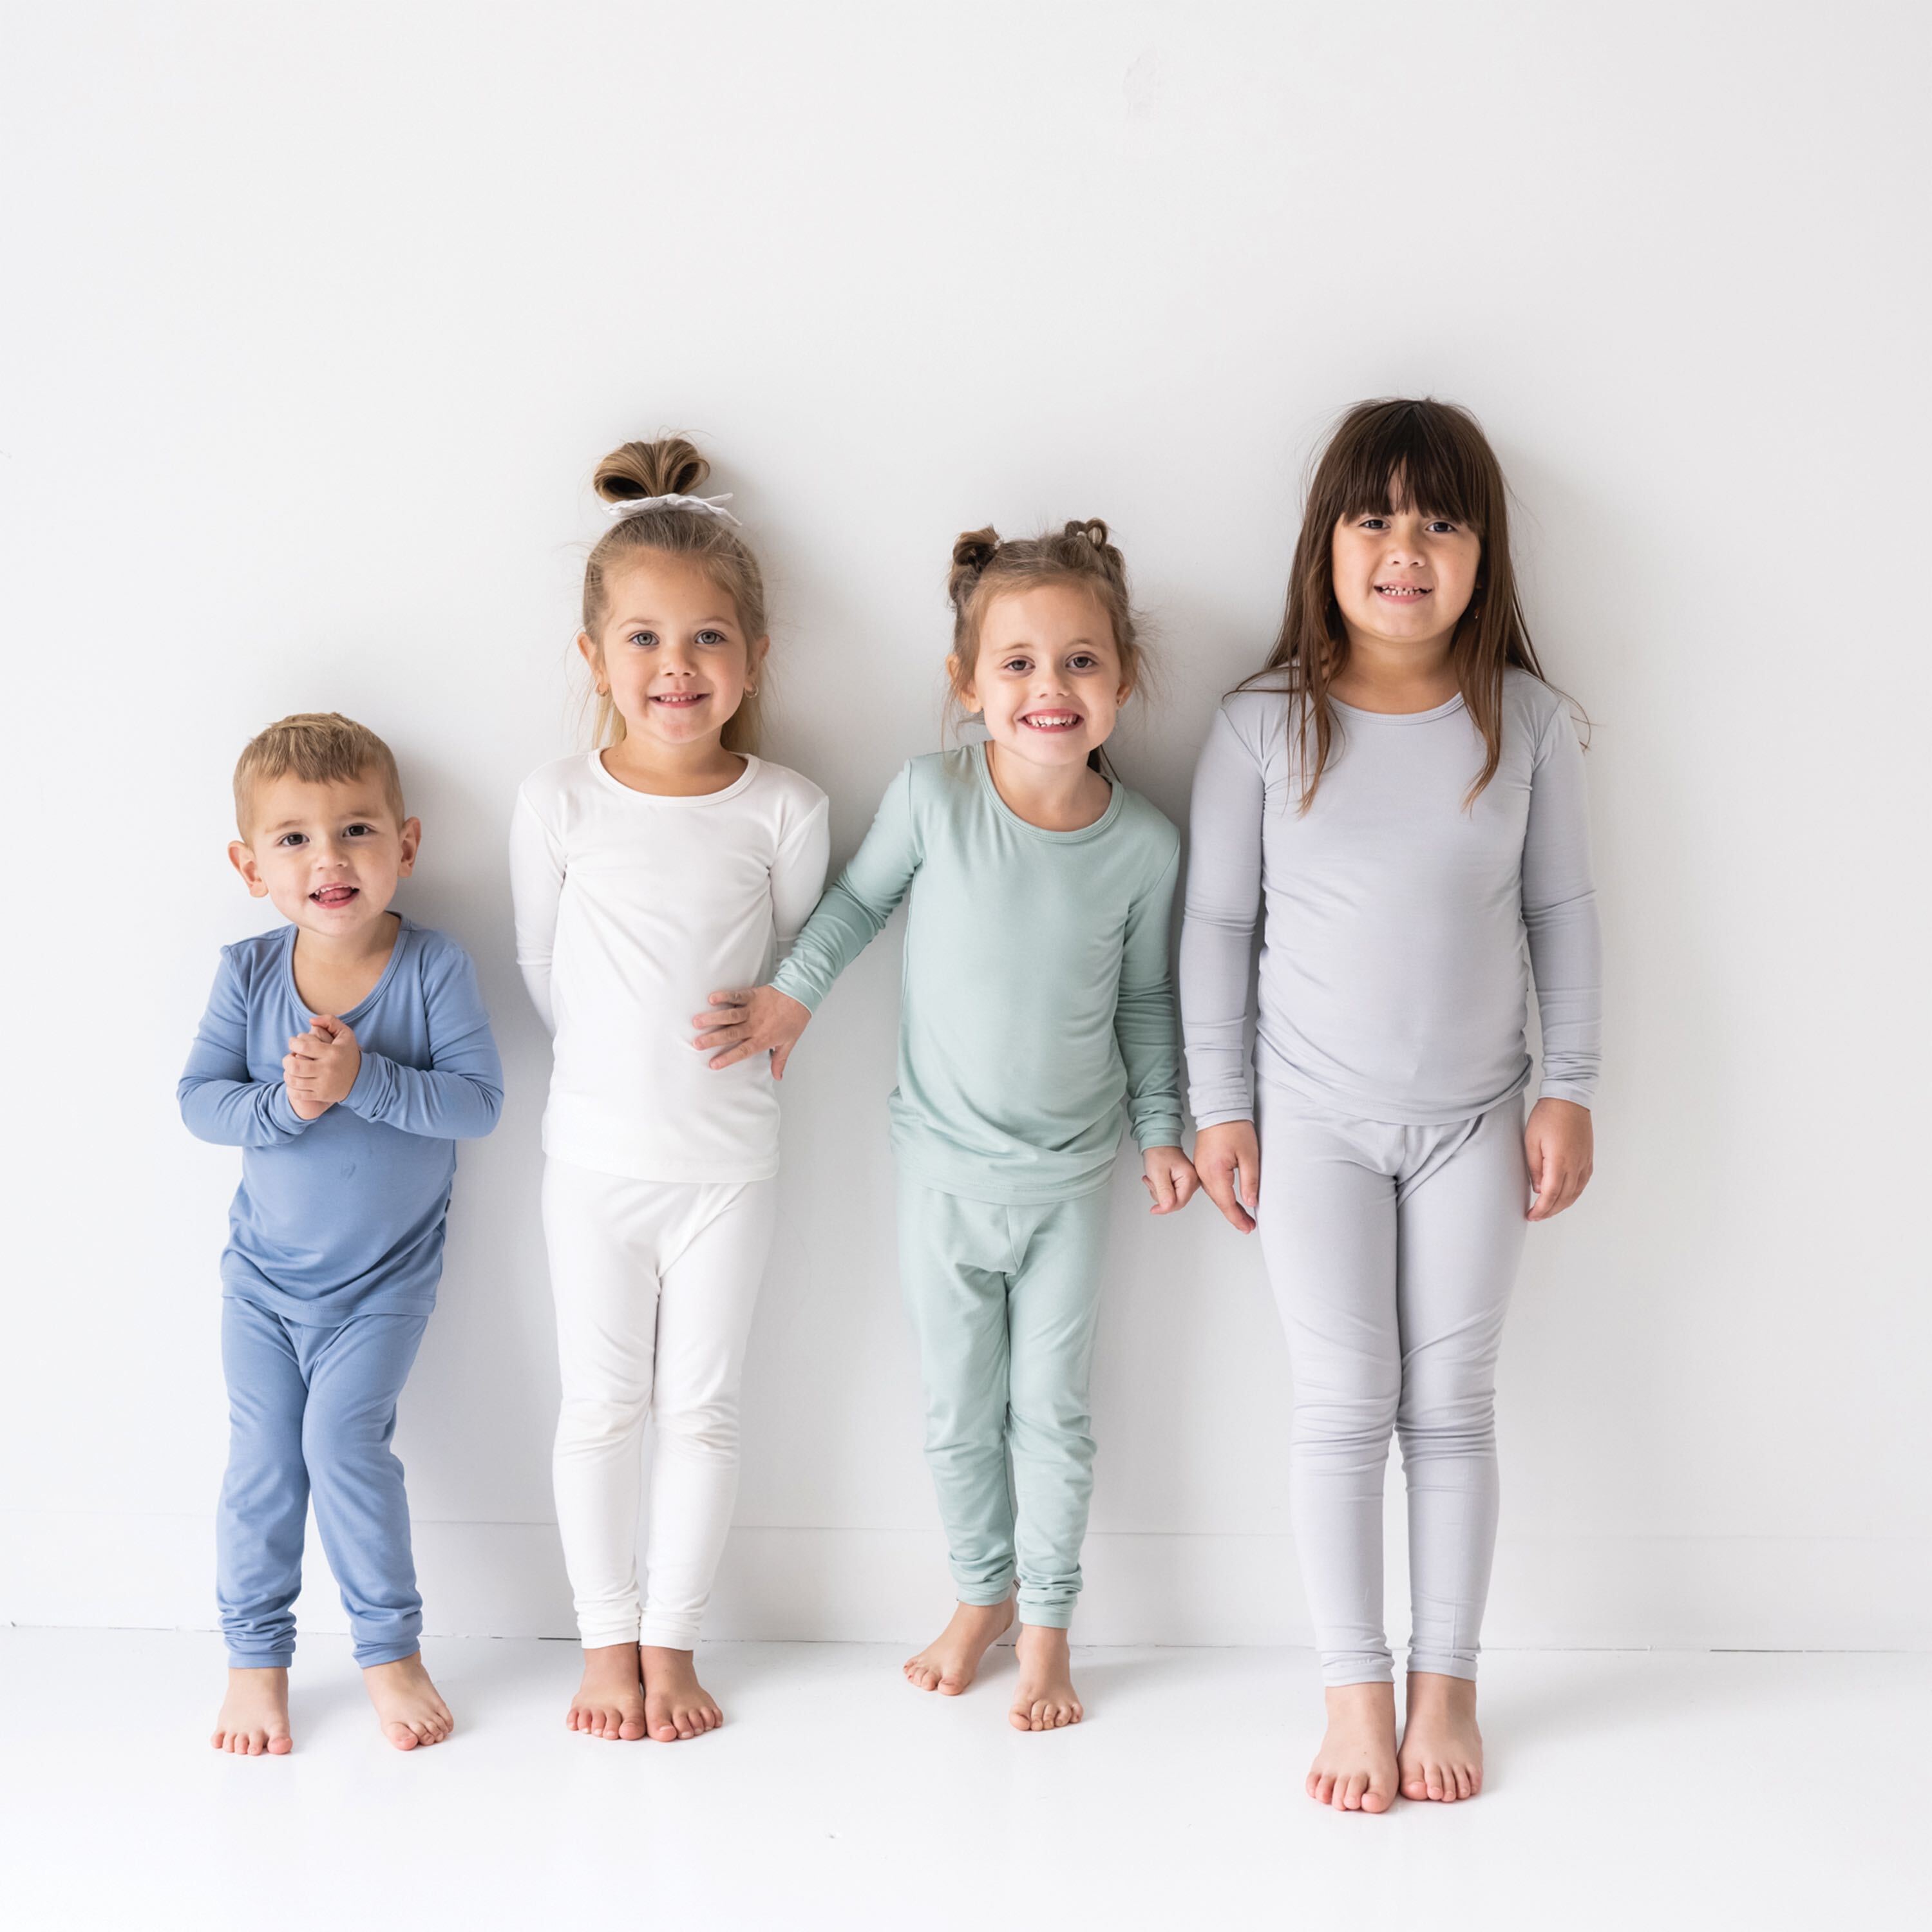 Four children wearing Kyte pajamas standing against a wall smiling for the camera